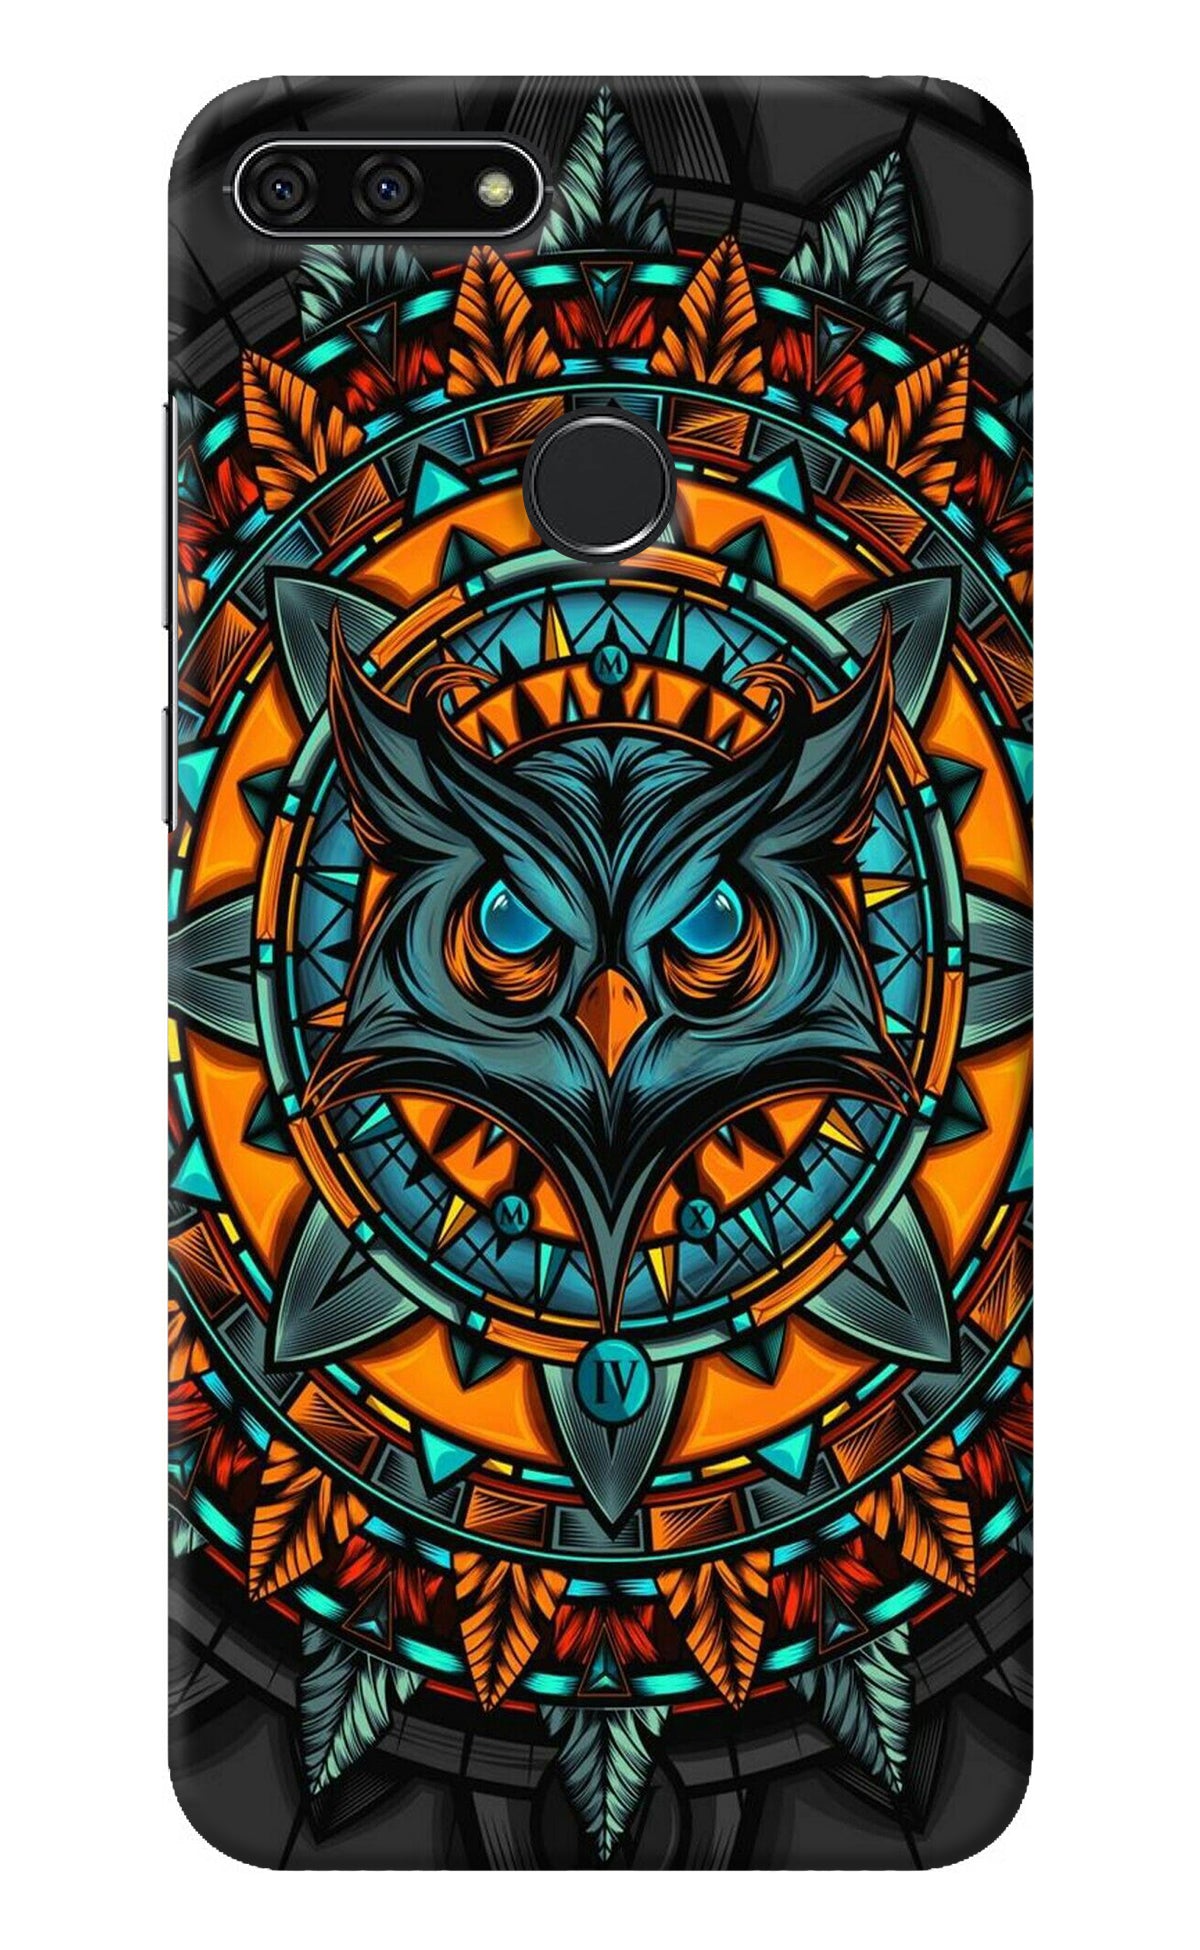 Angry Owl Art Honor 7A Back Cover